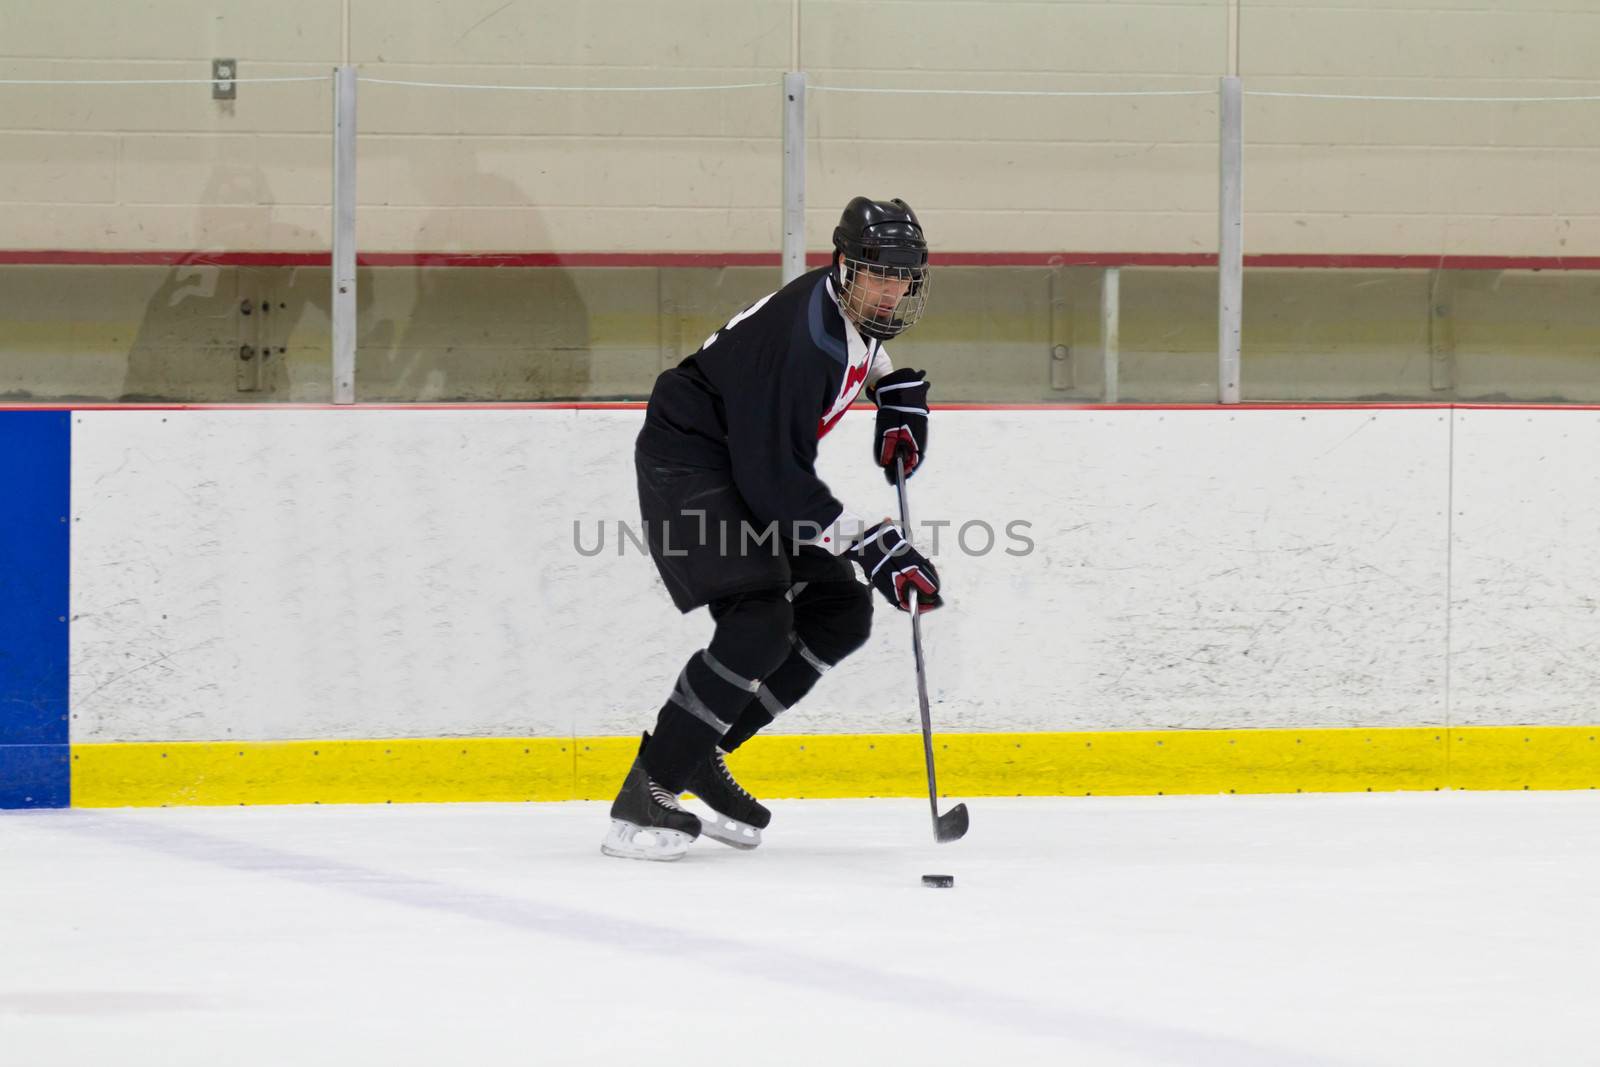 Male hockey player skating with the puck